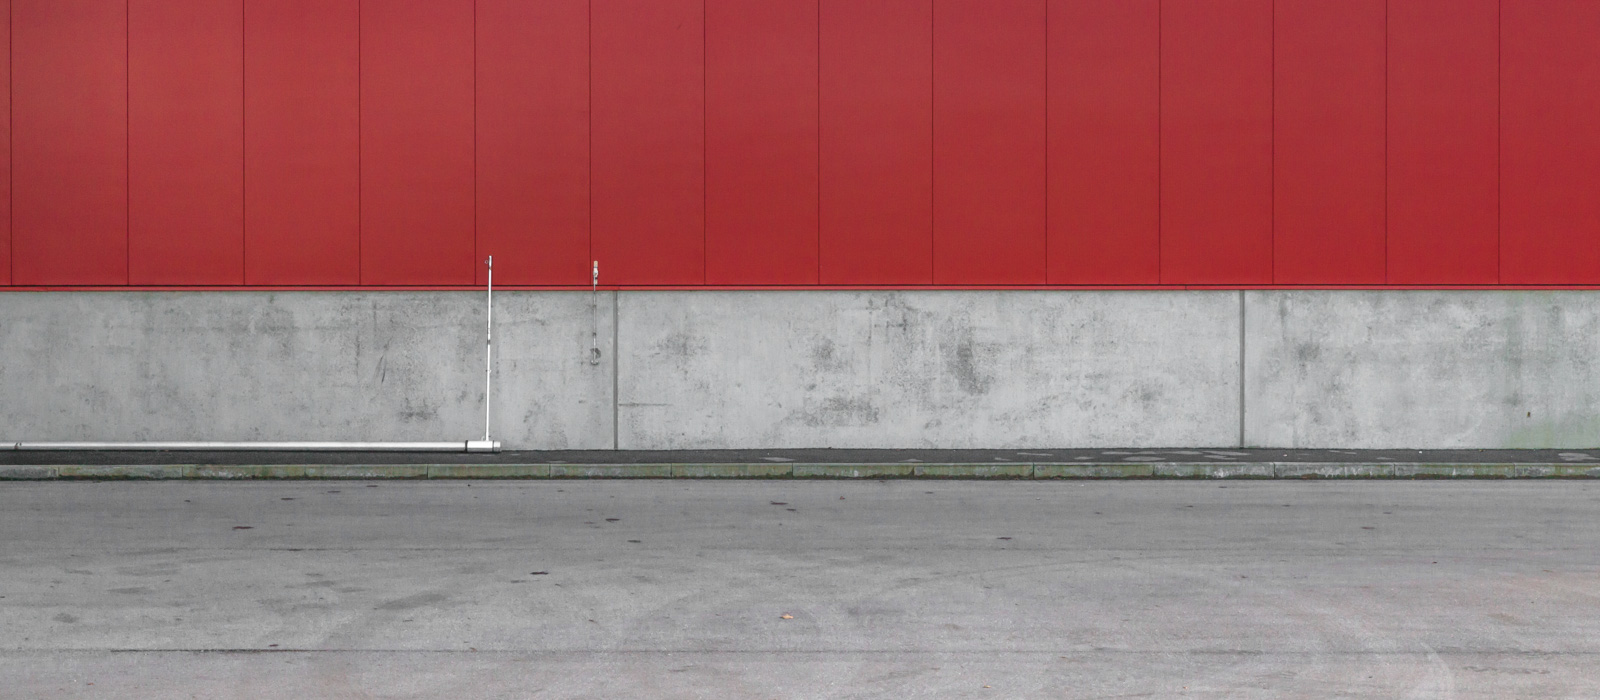 minimalistic horizontal image, seeming two-dimensional, showing a red steel wall with a concrete socket, a pedestrians walk and a street